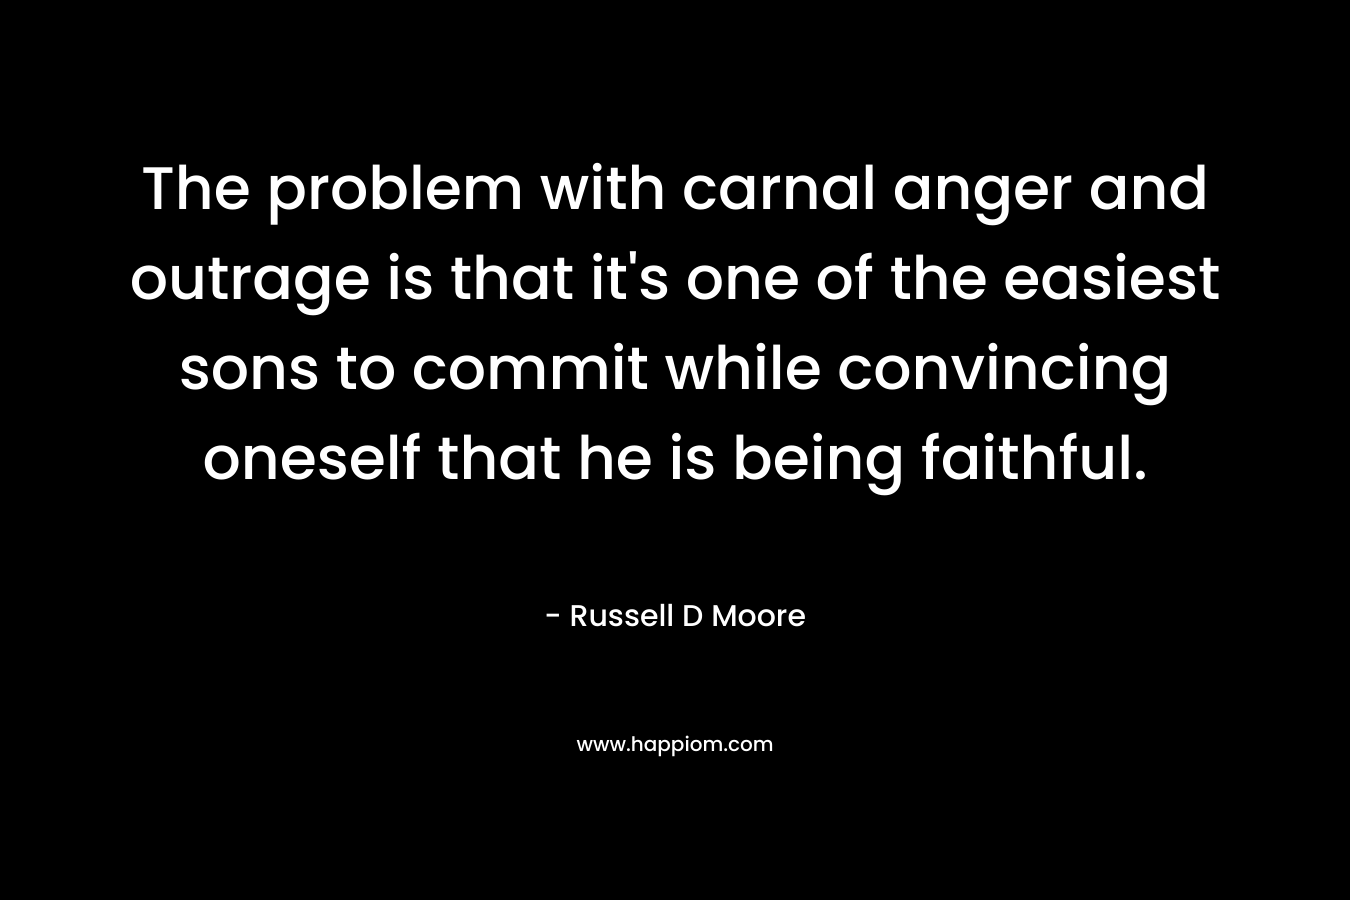 The problem with carnal anger and outrage is that it's one of the easiest sons to commit while convincing oneself that he is being faithful.